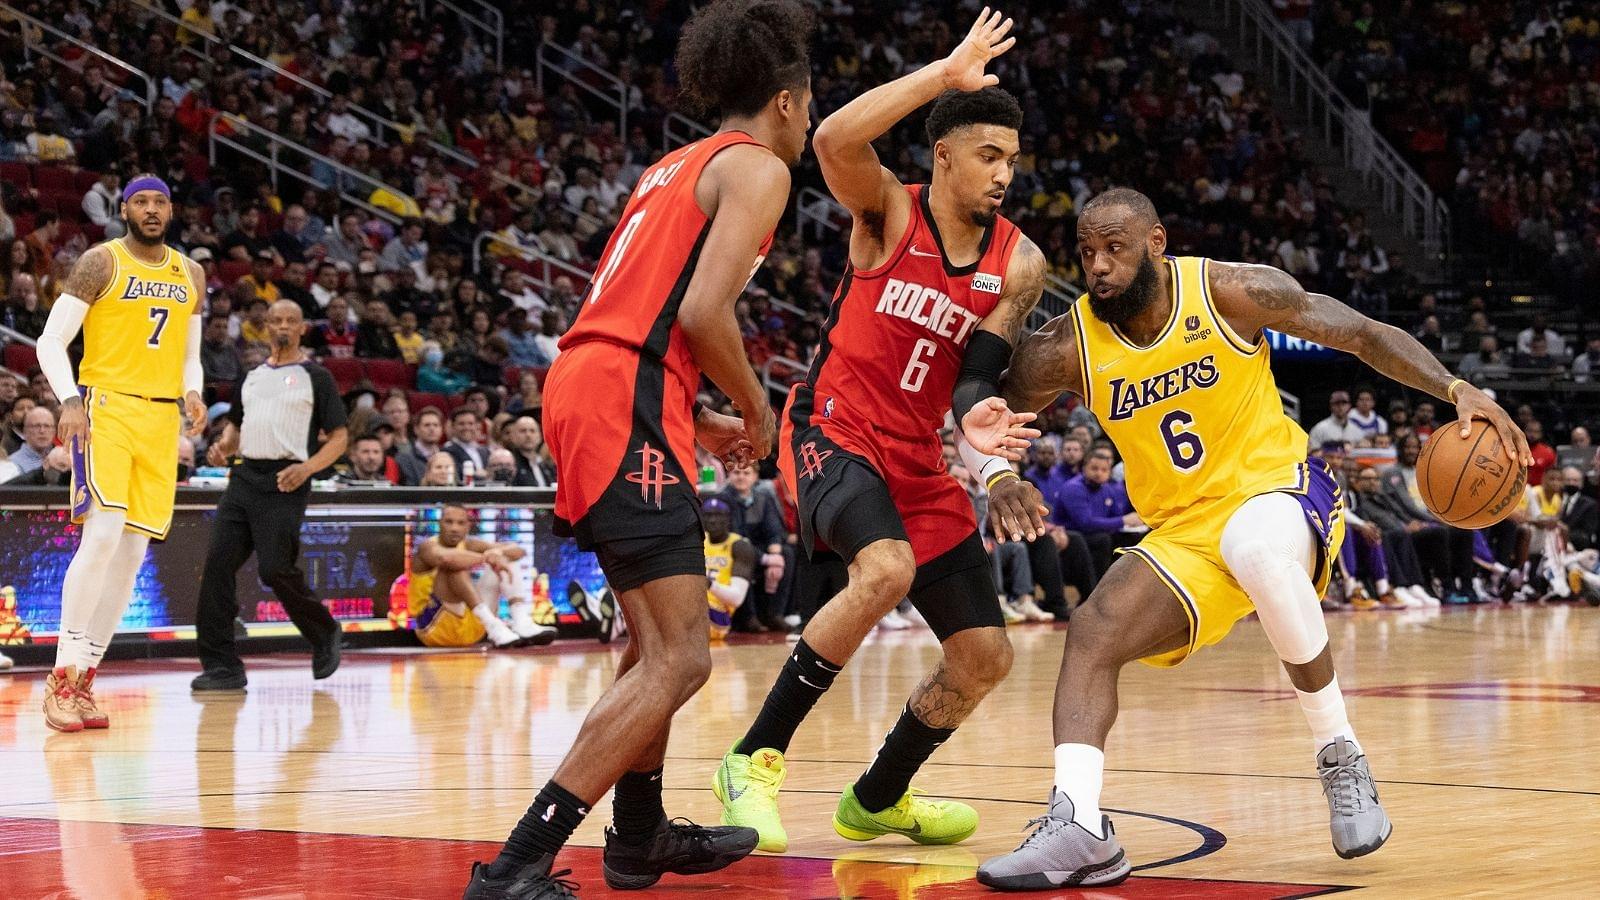 "LeBron James chickened out!!!": Veteran analyst calls out Lakers MVP as he passed up the opportunity to seal the deal against the Rockets